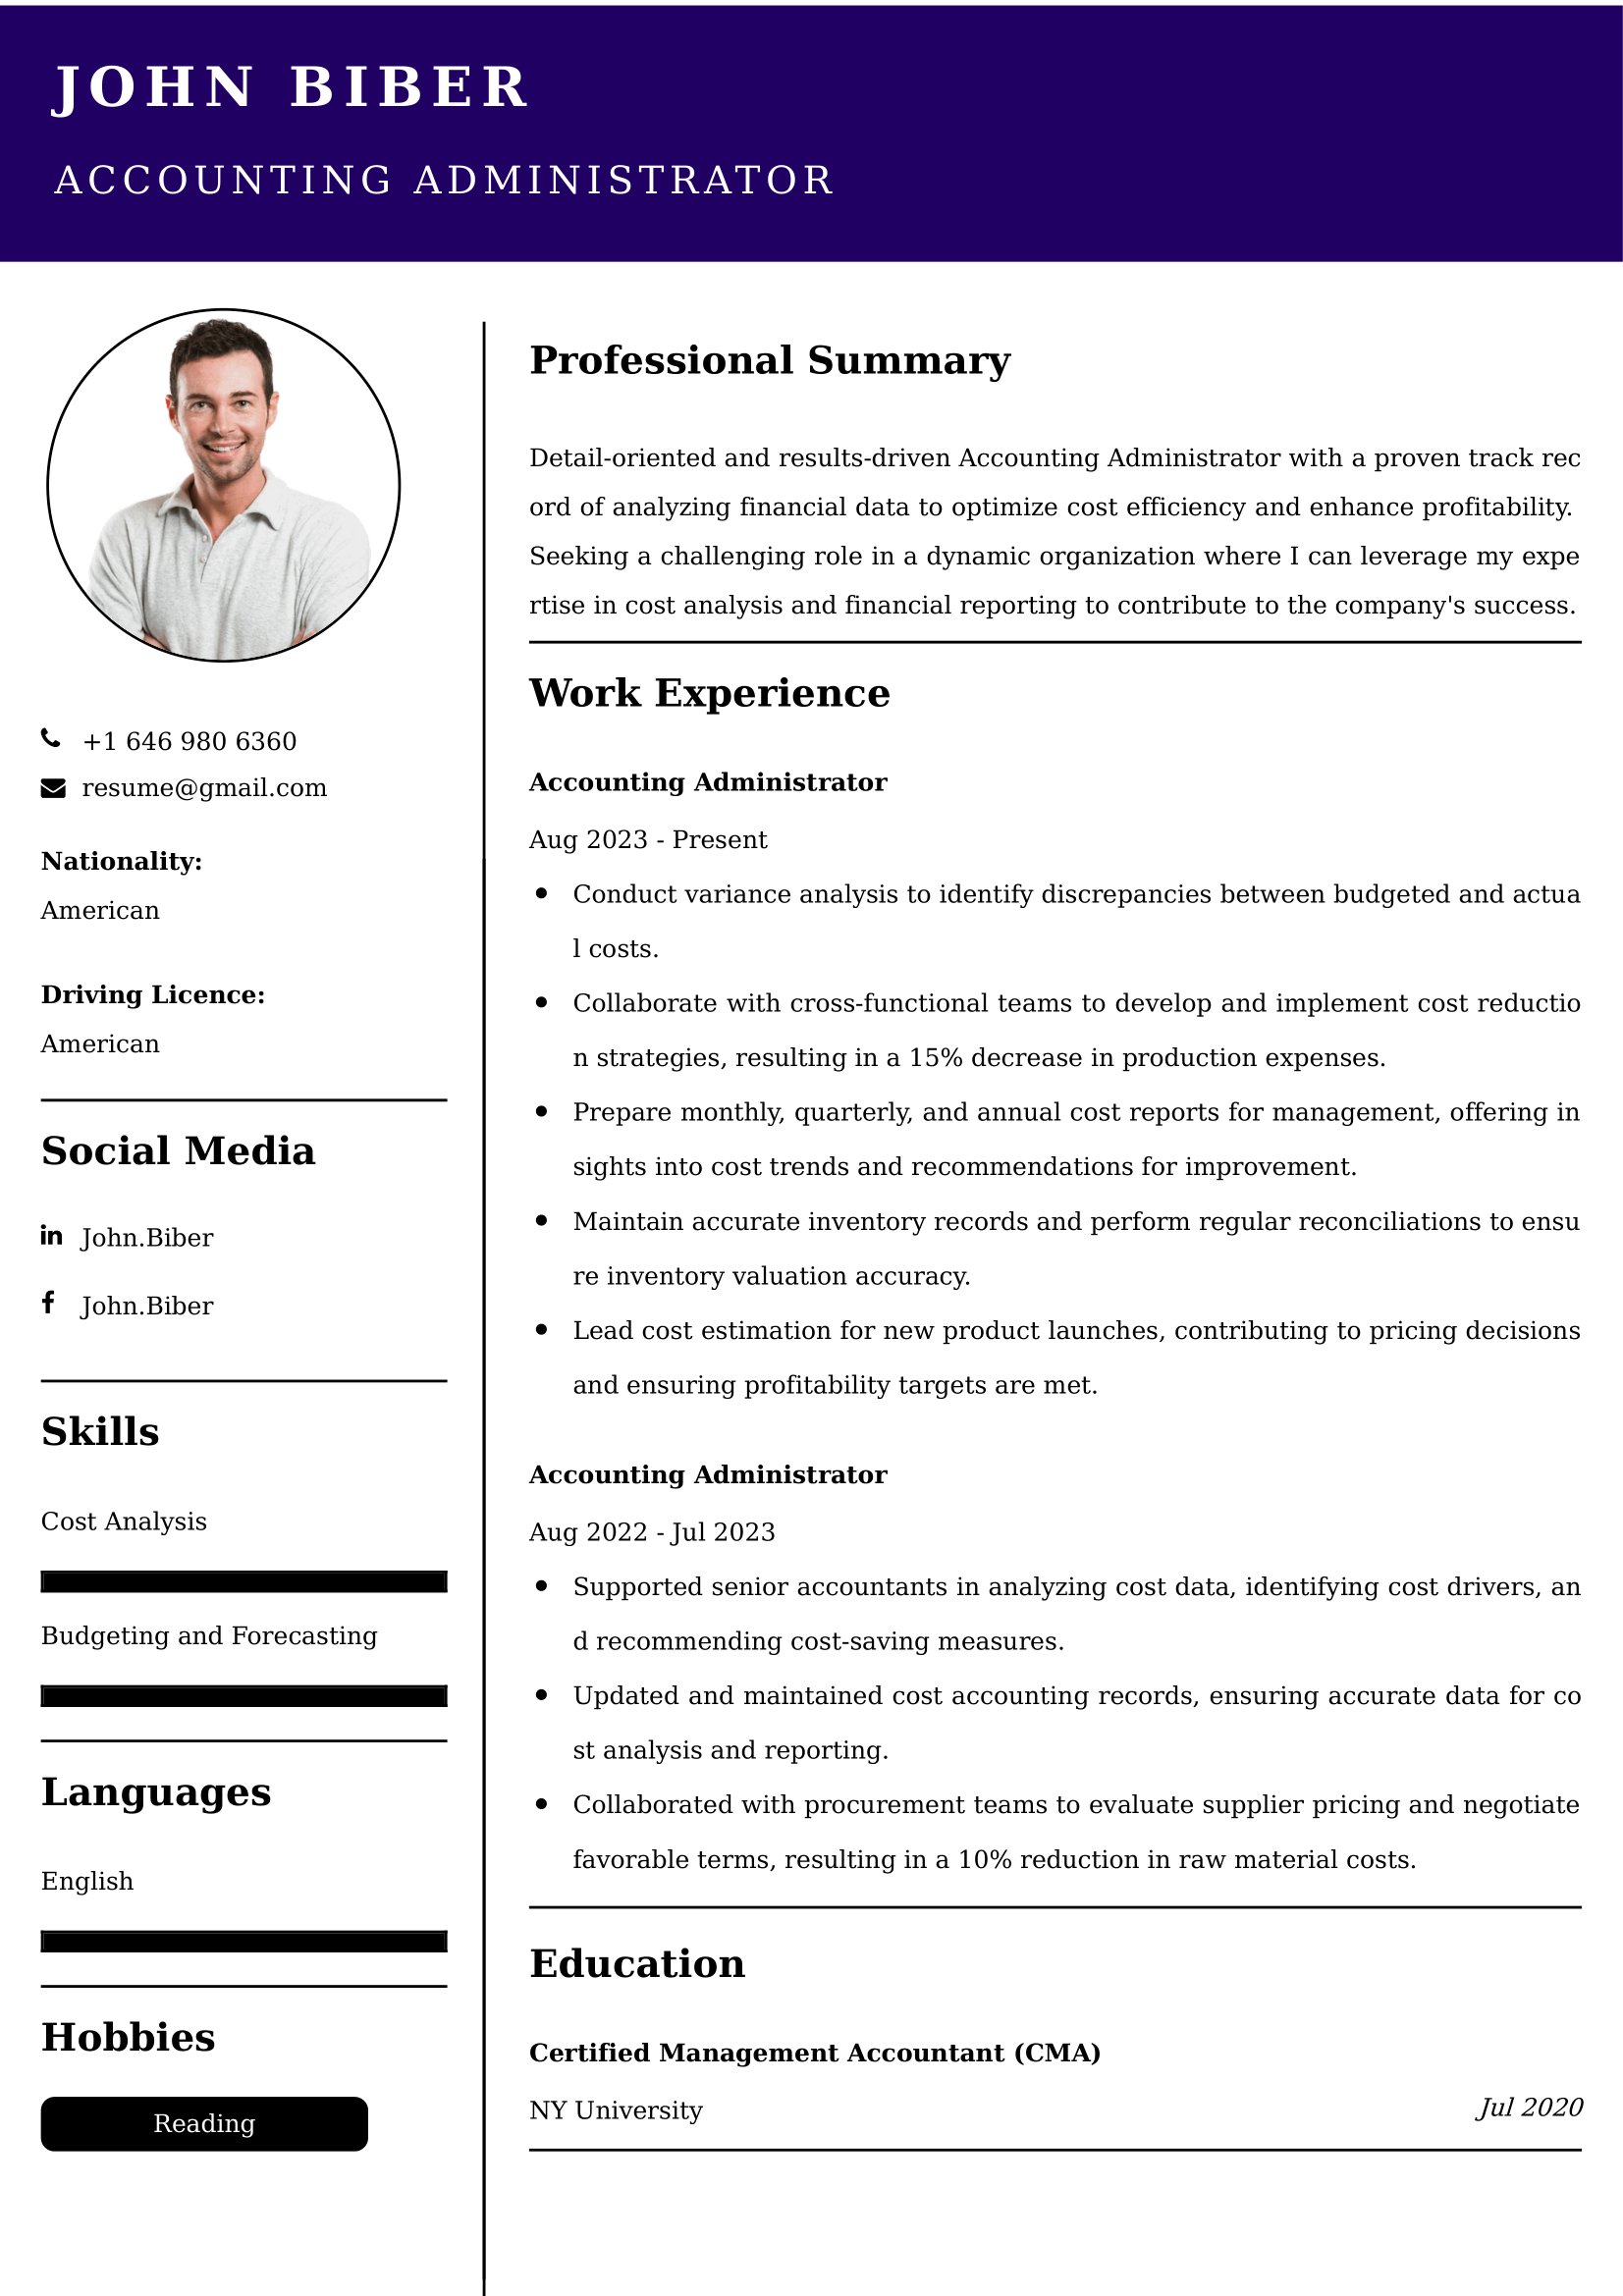 Accounting Administrator Resume Examples - Canadian Format and Tips